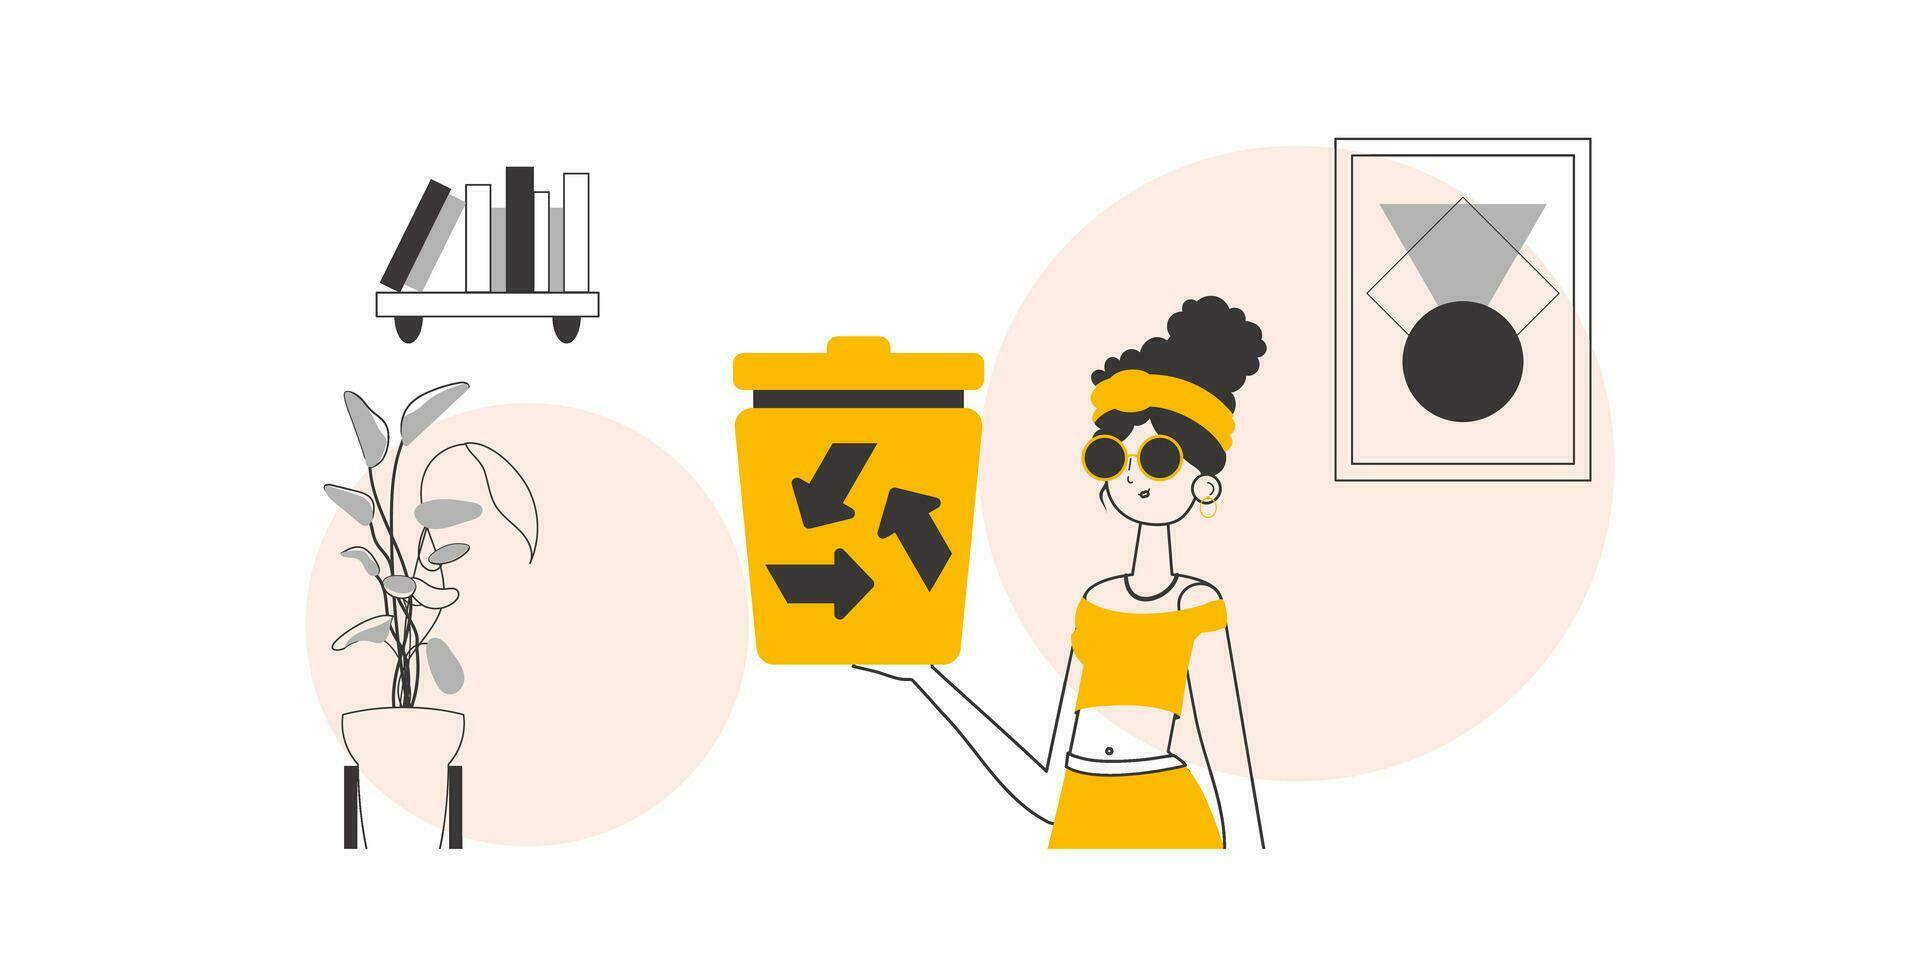 A woman is holding a trash can. Waste recycling concept. Linear style. vector